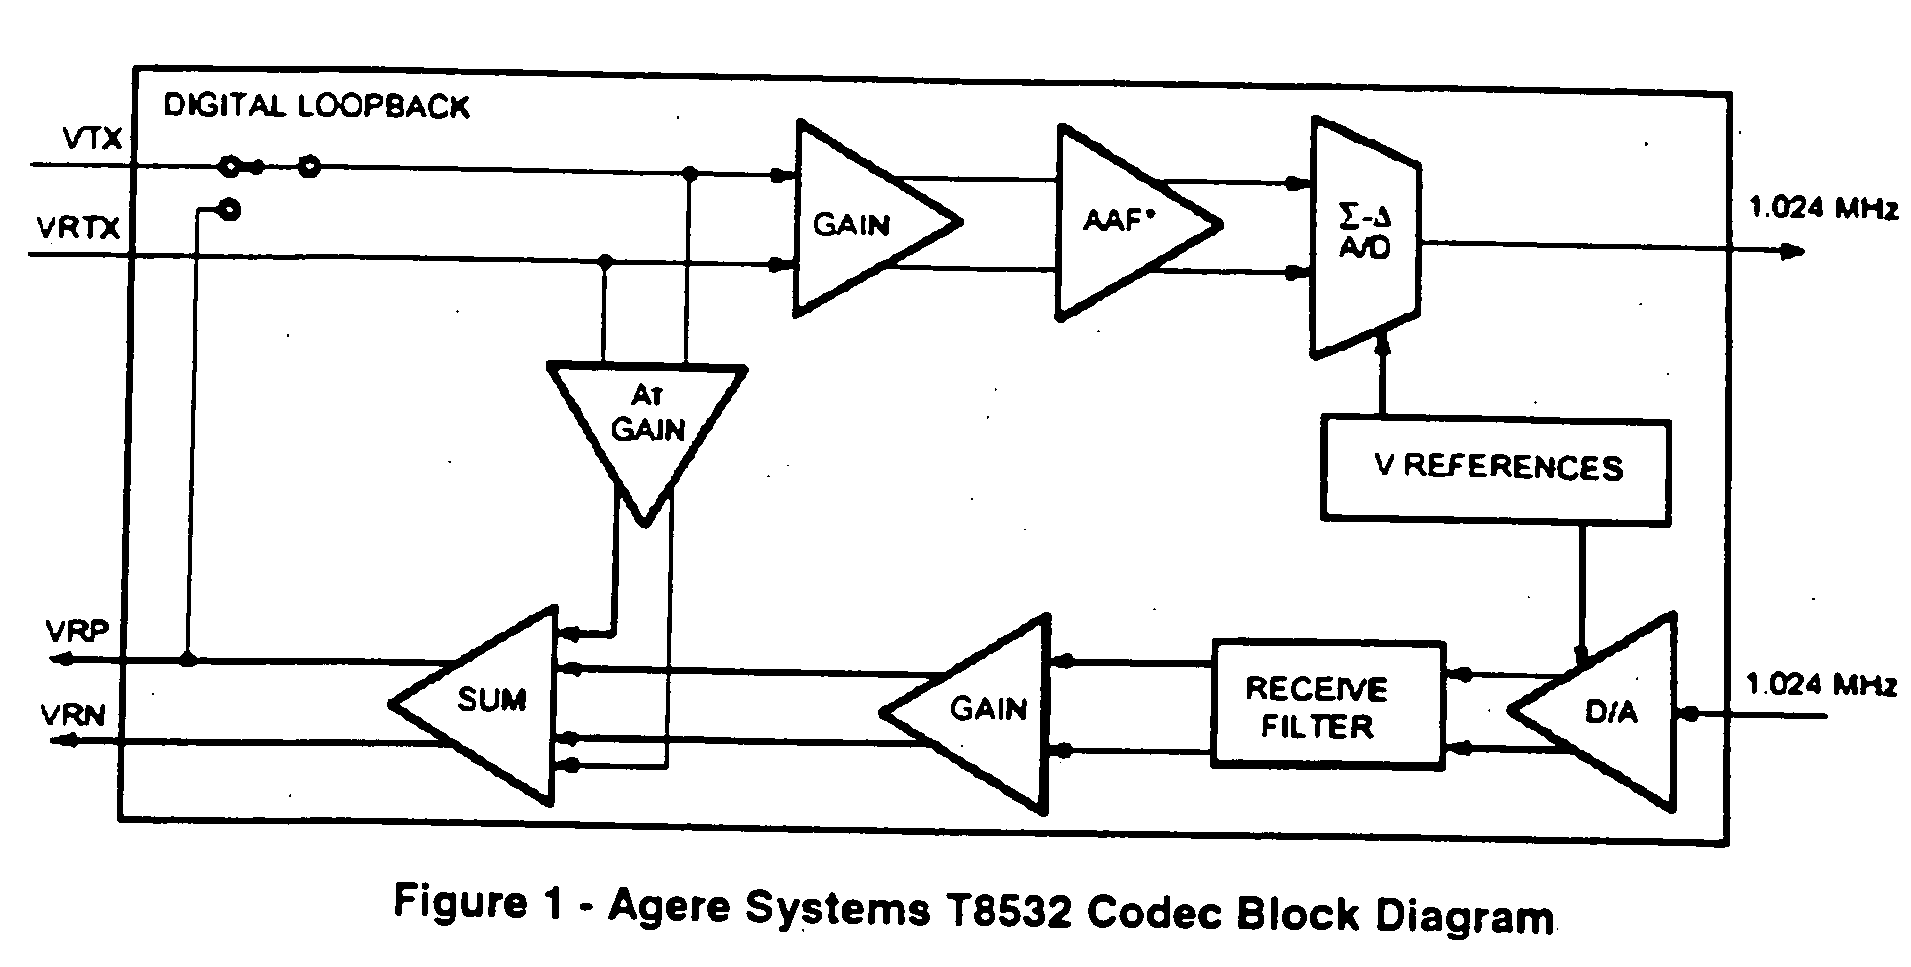 3-Way call detection system